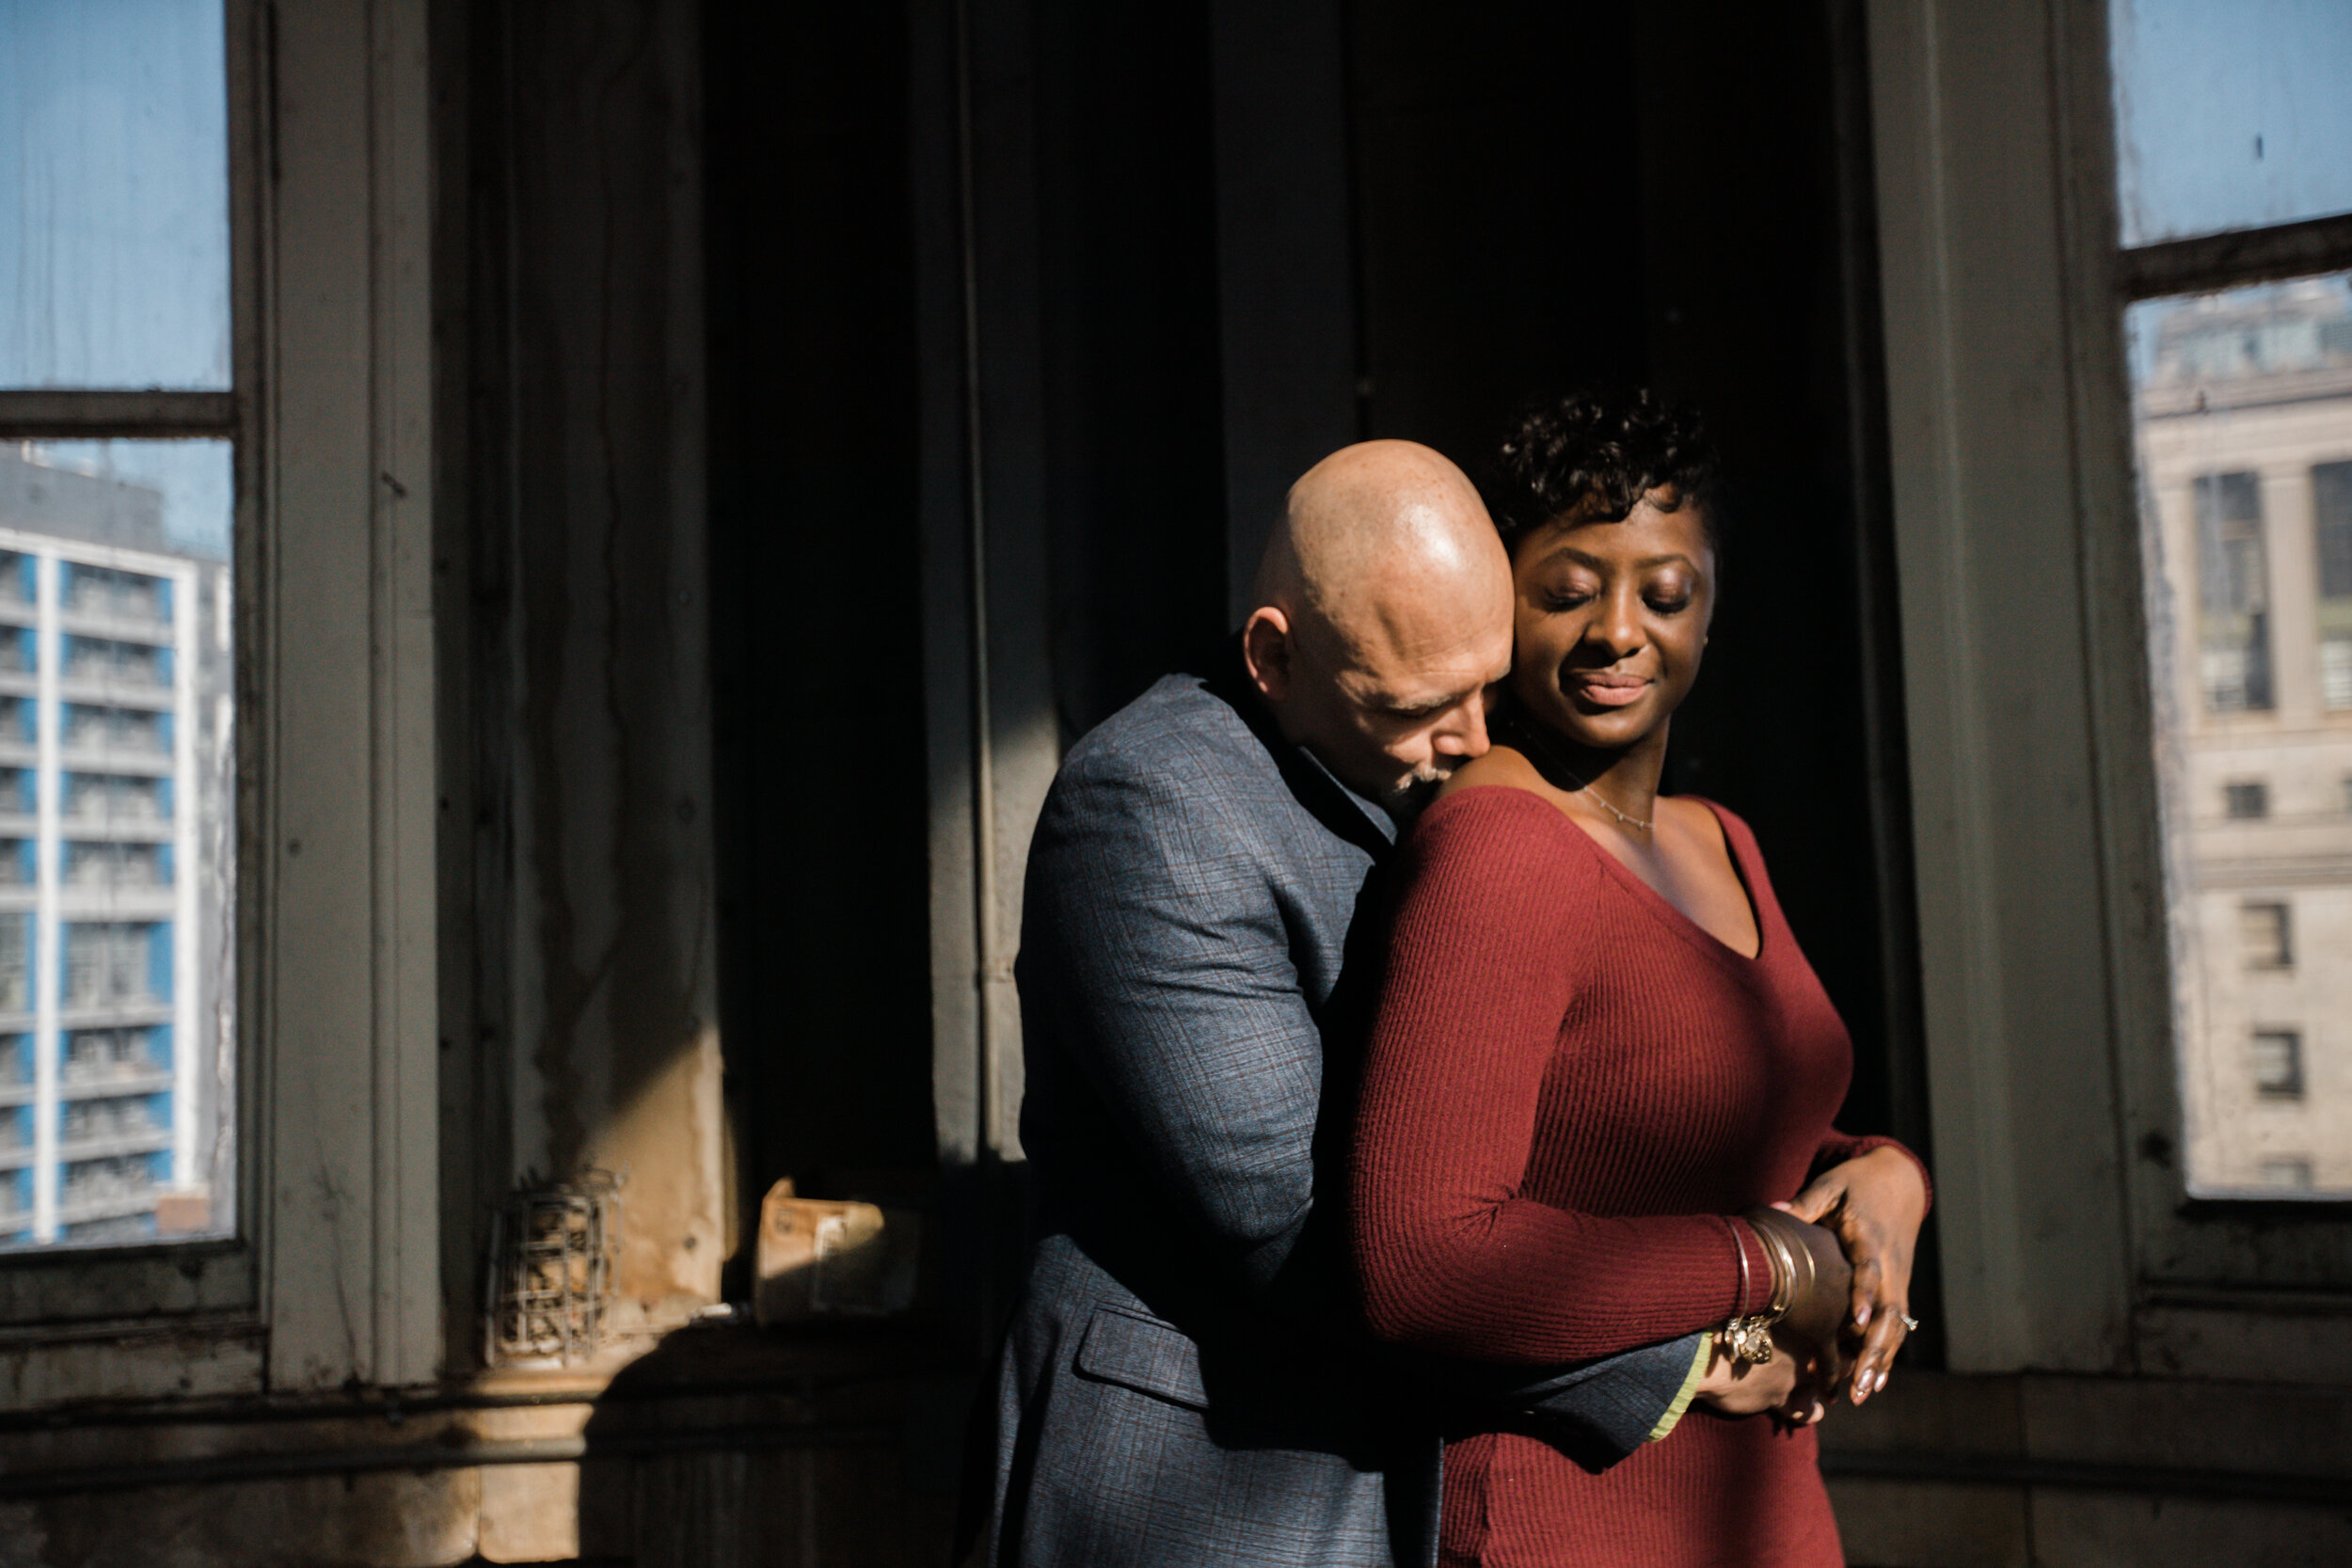 Beautiful Engagement Session at Baltimore City Hall by Baltimores Best Wedding Photographers Megapixels Media Black Wedding Photographers-31.jpg